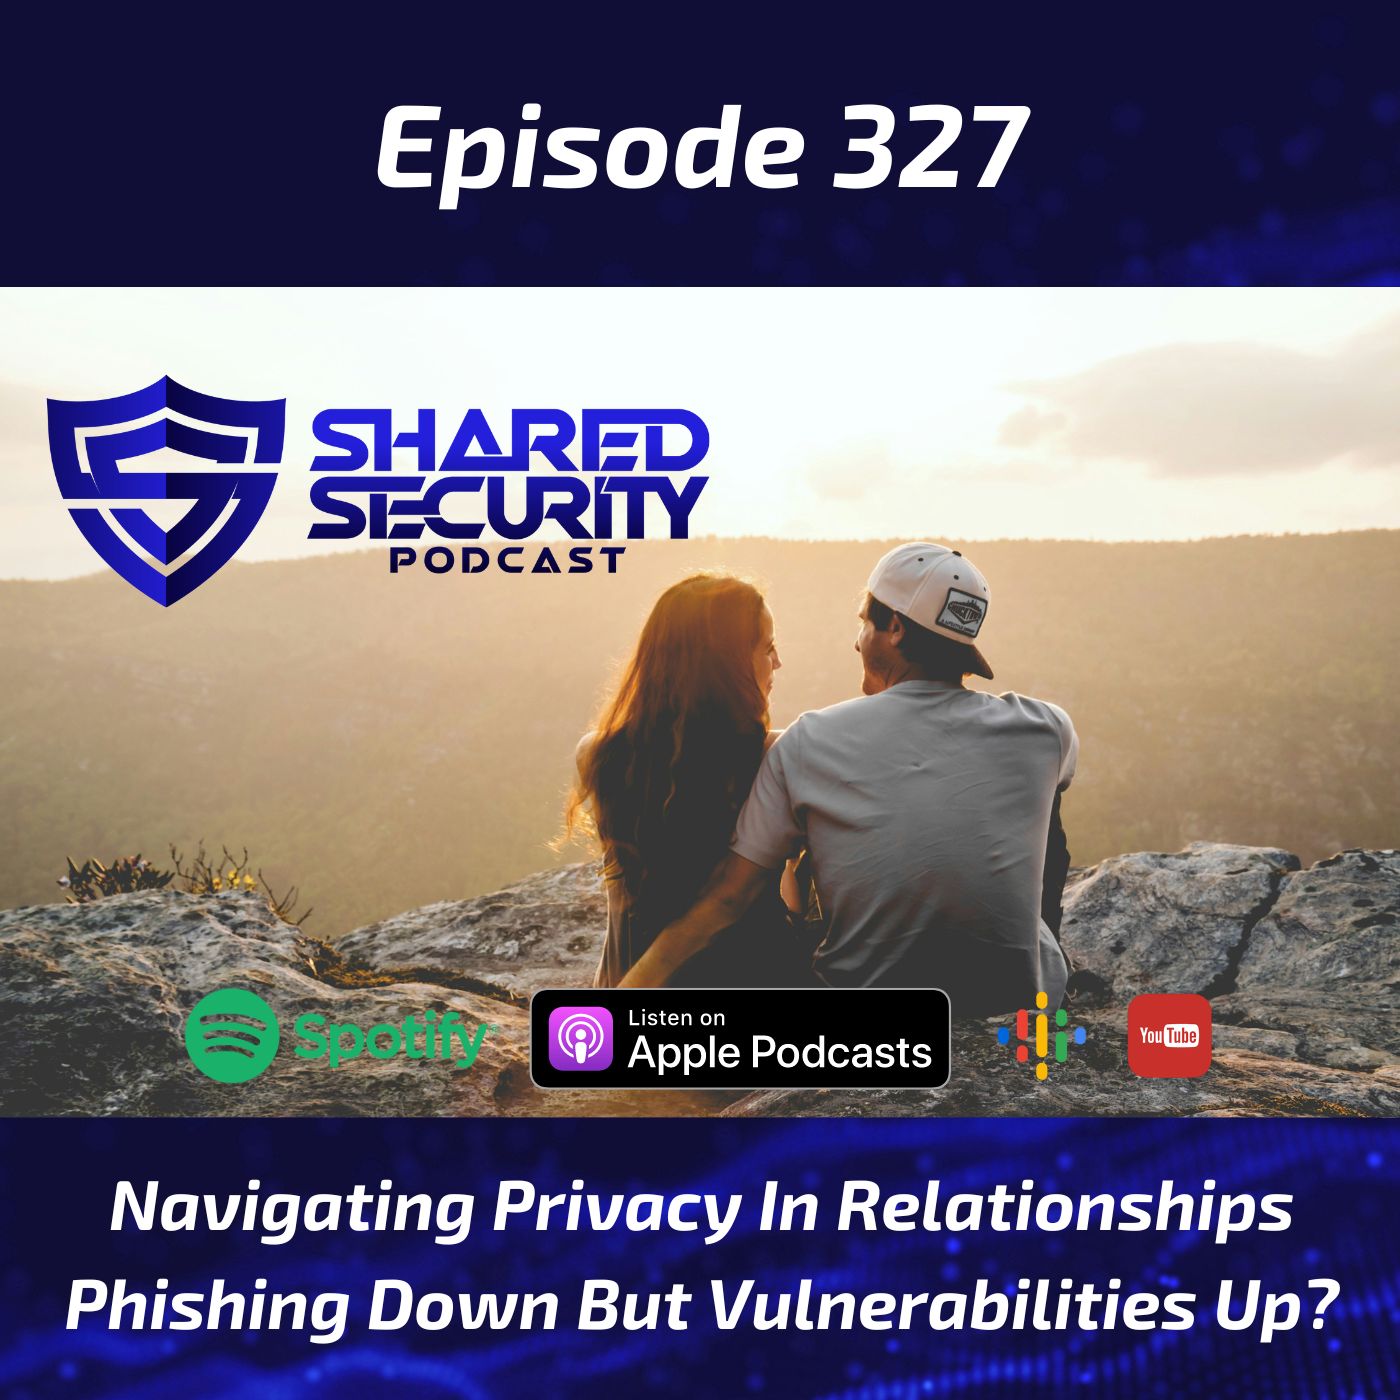 Privacy Challenges in Relationships, Phishing Down but Vulnerabilities Up?